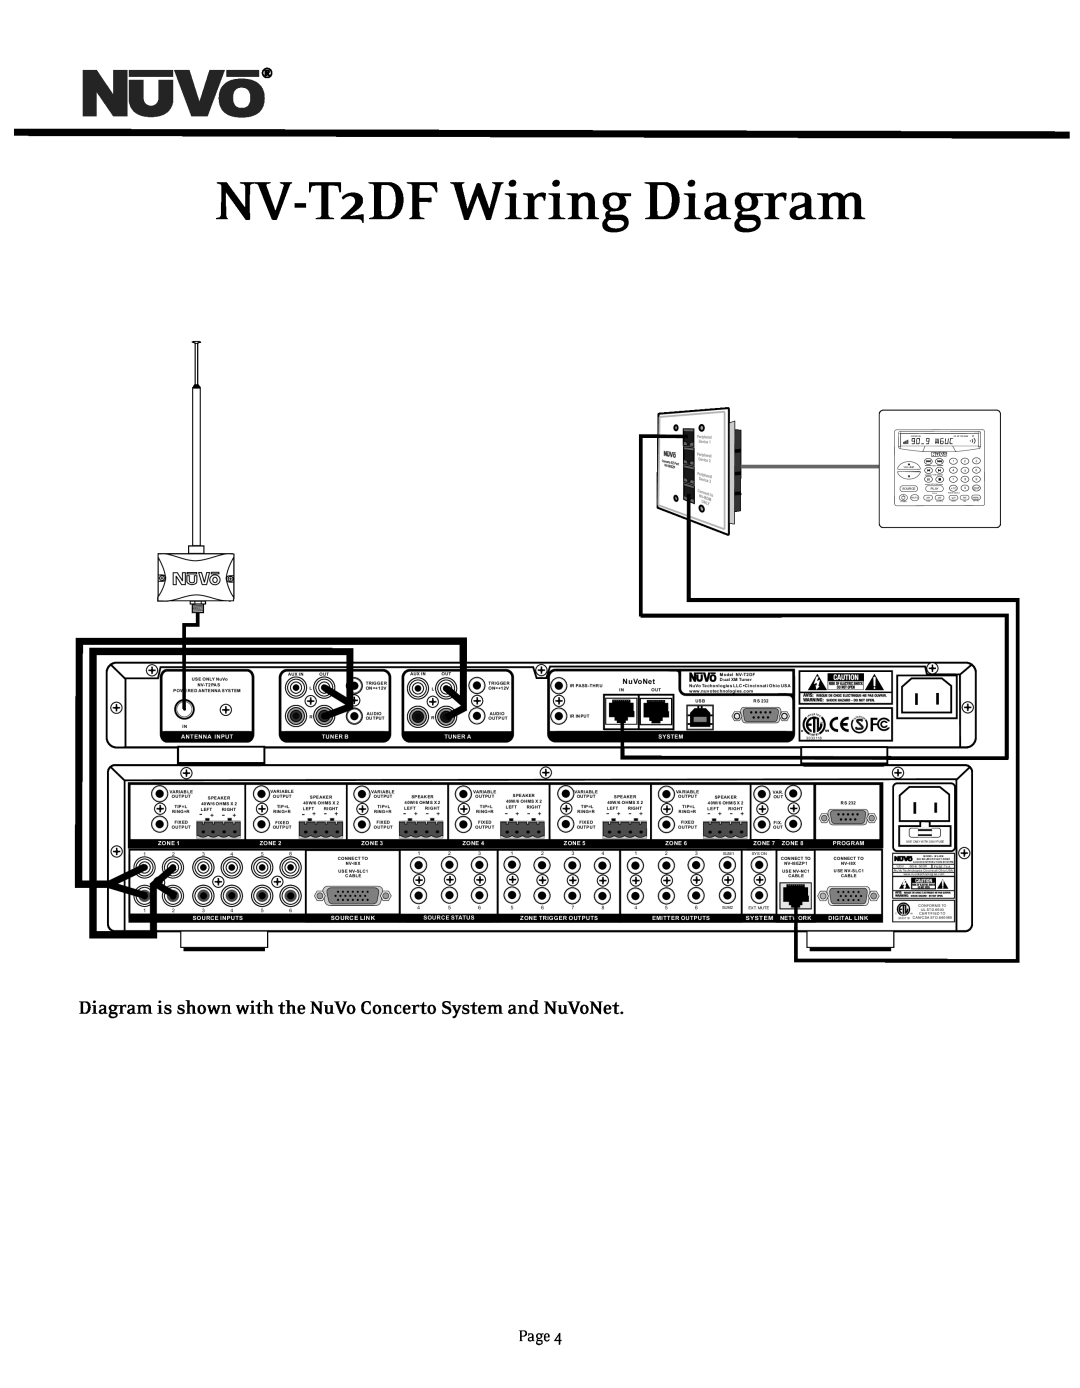 Nuvo manual NV-T2DFWiring Diagram, Page, NuVoNet, Antenna Input, Tuner B, Tuner A, System, Source Link 